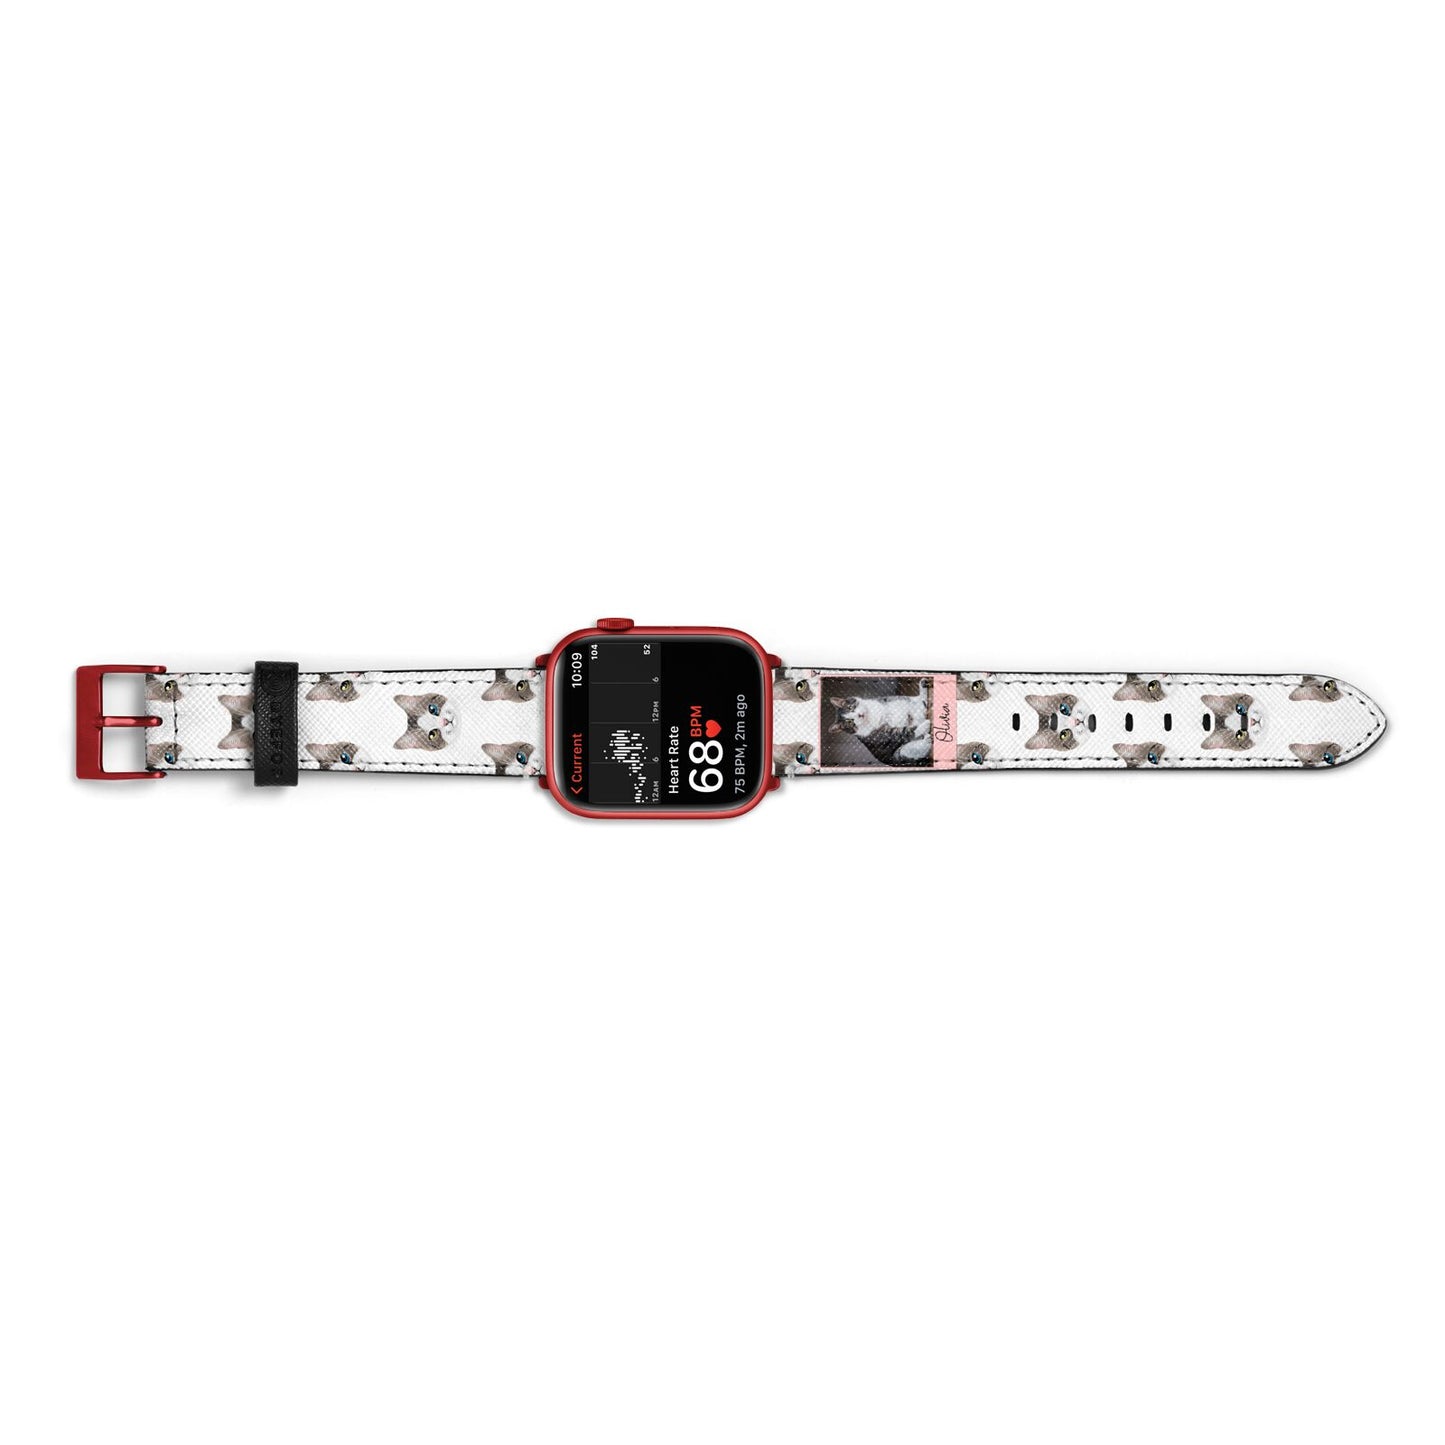 Personalised Cat Photo Apple Watch Strap Size 38mm Landscape Image Red Hardware